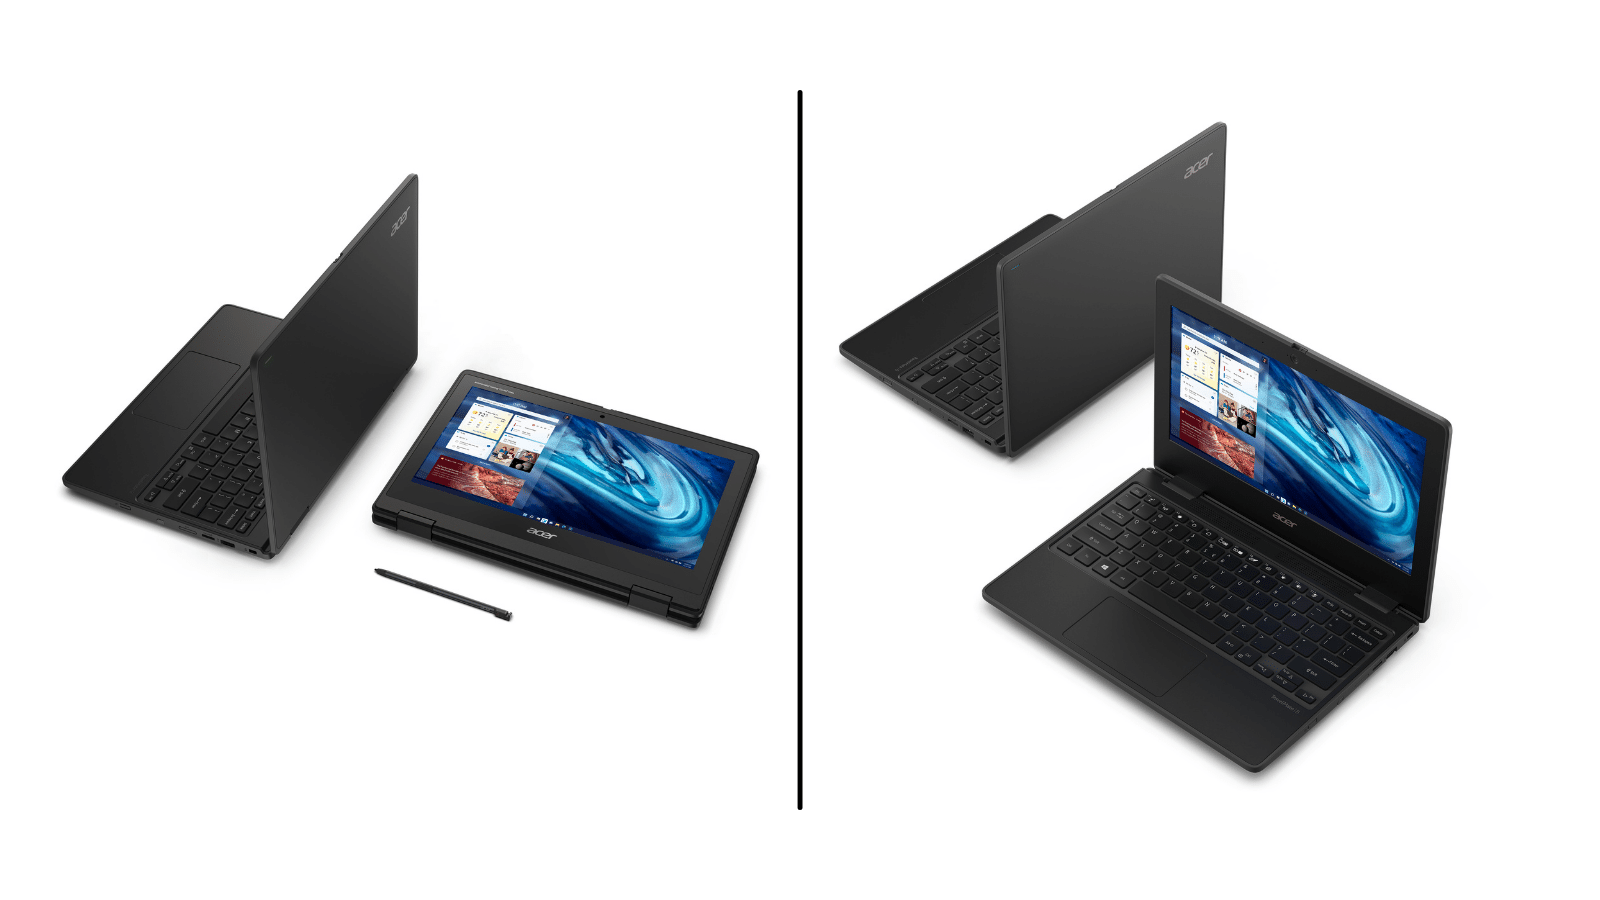 Acer Travelmate side-by-side